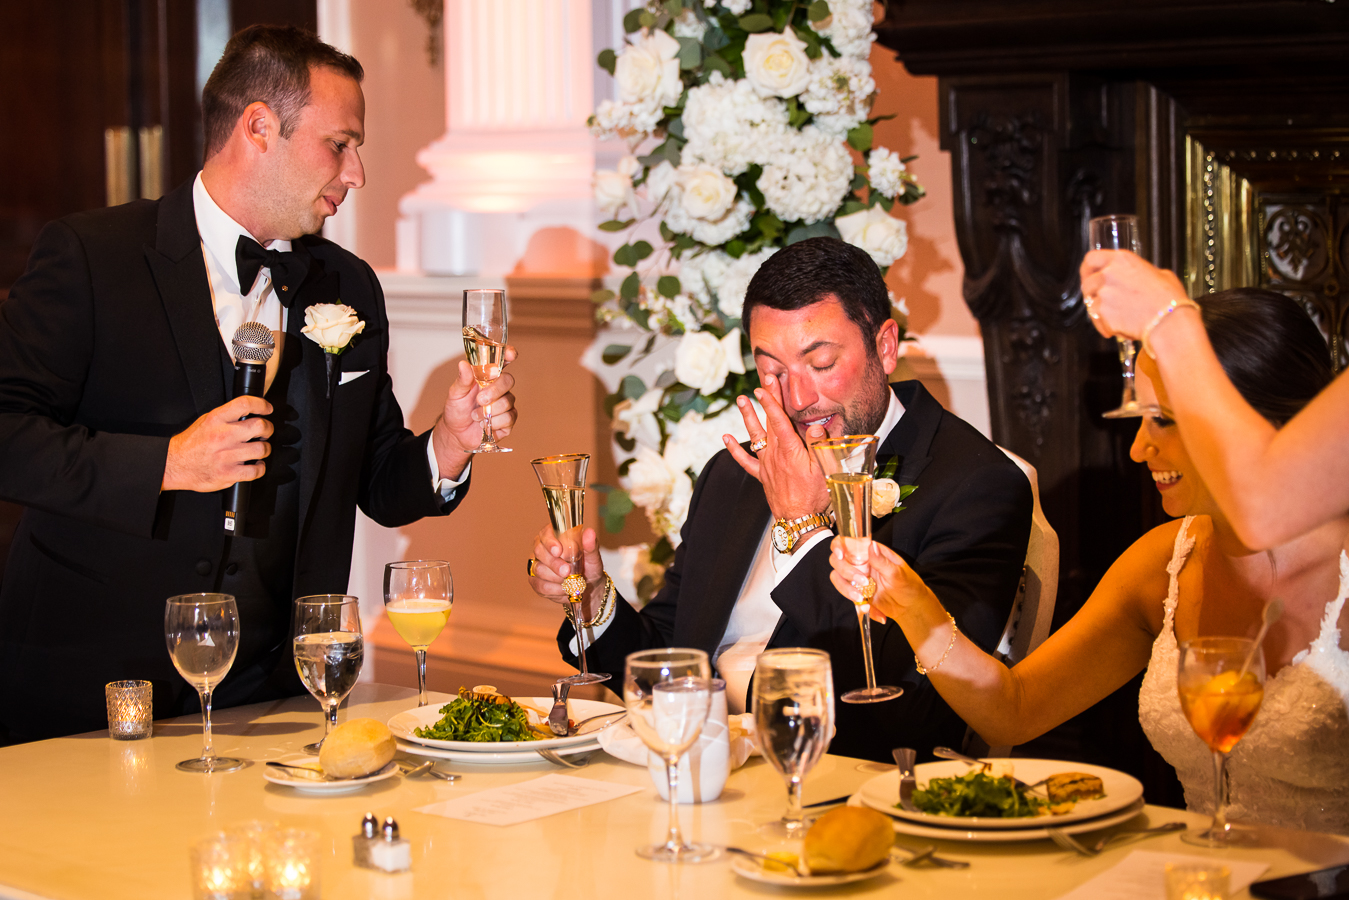 nj wedding photographer, lisa rhinehart, captures this sentimental moment of the groom as he wipes away his tears from the heartfelt speeches given during this palace at somerset wedding reception 